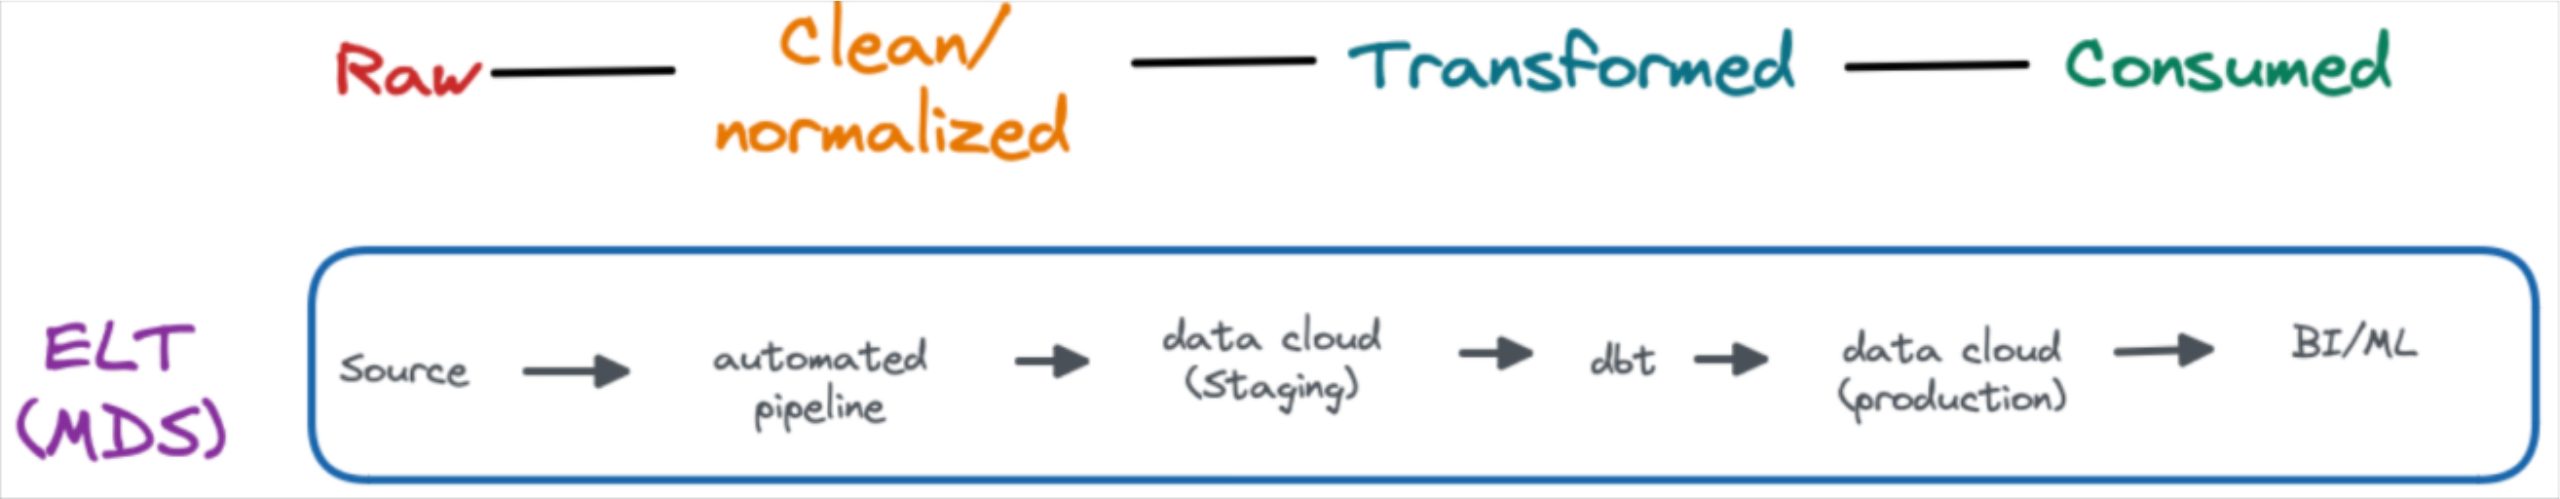 Data pipeline architecture and how the ELT design handles the data lifecycle.